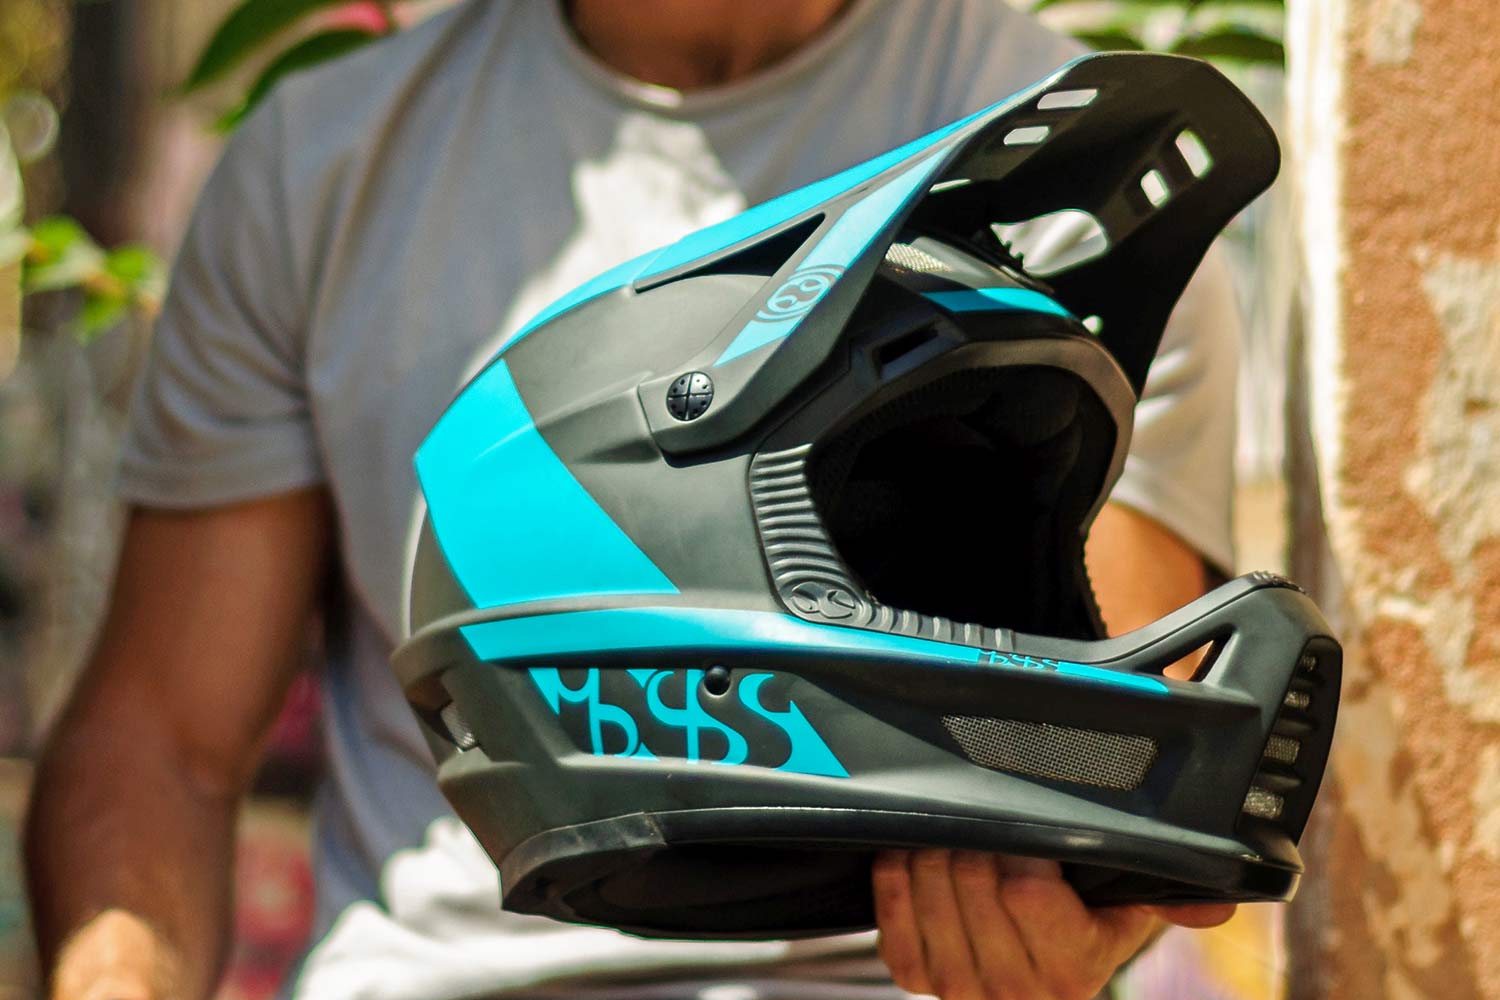 iXS Xult DH full face helmet, lightweight downhill race protection, angled